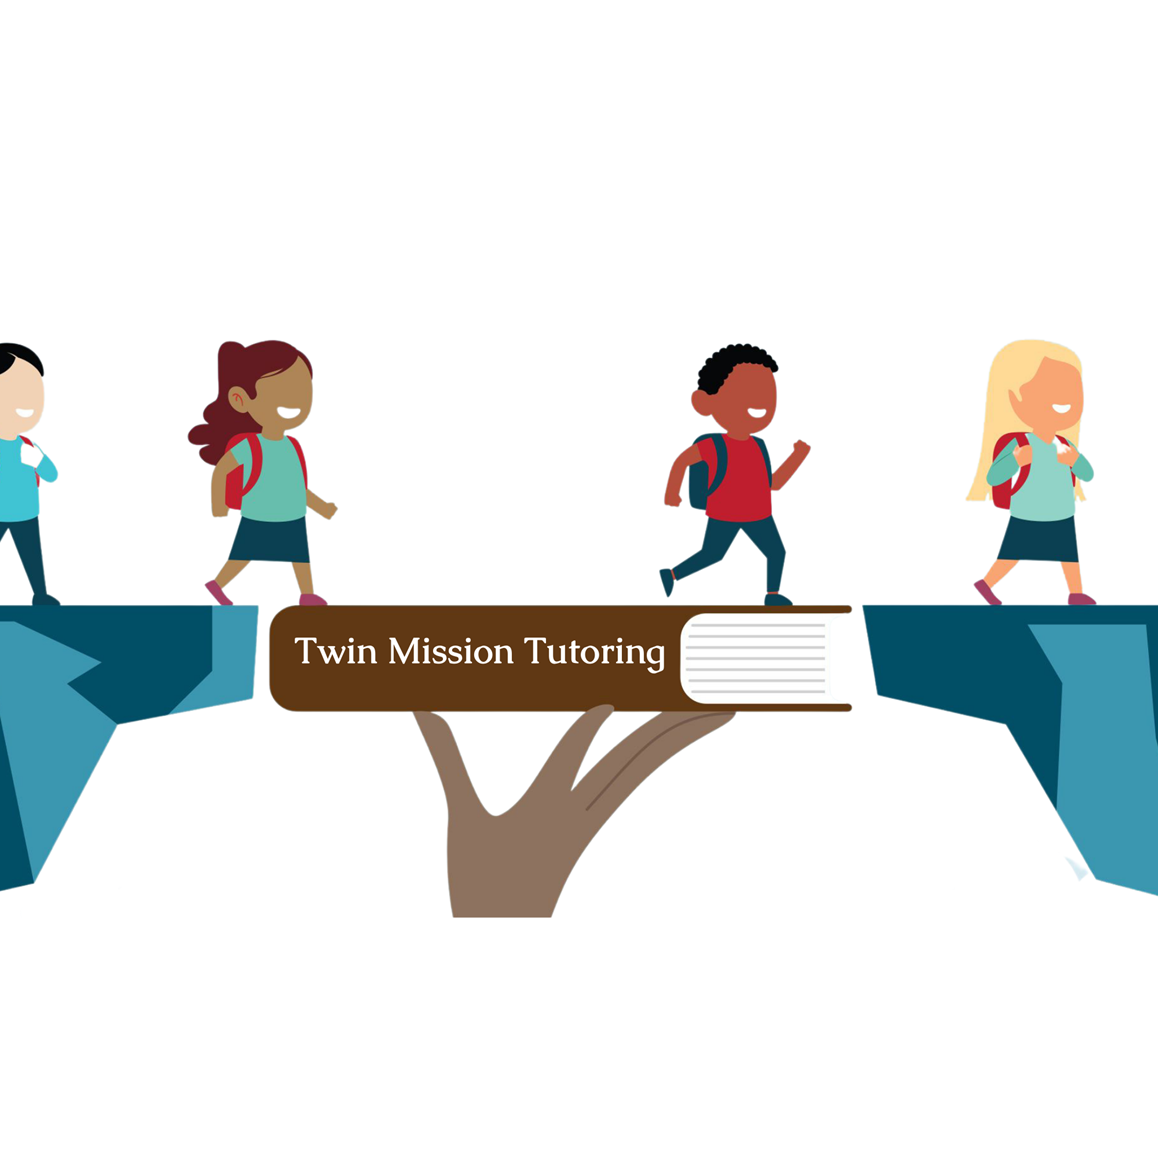 Twin Mission Tutoring (2).png